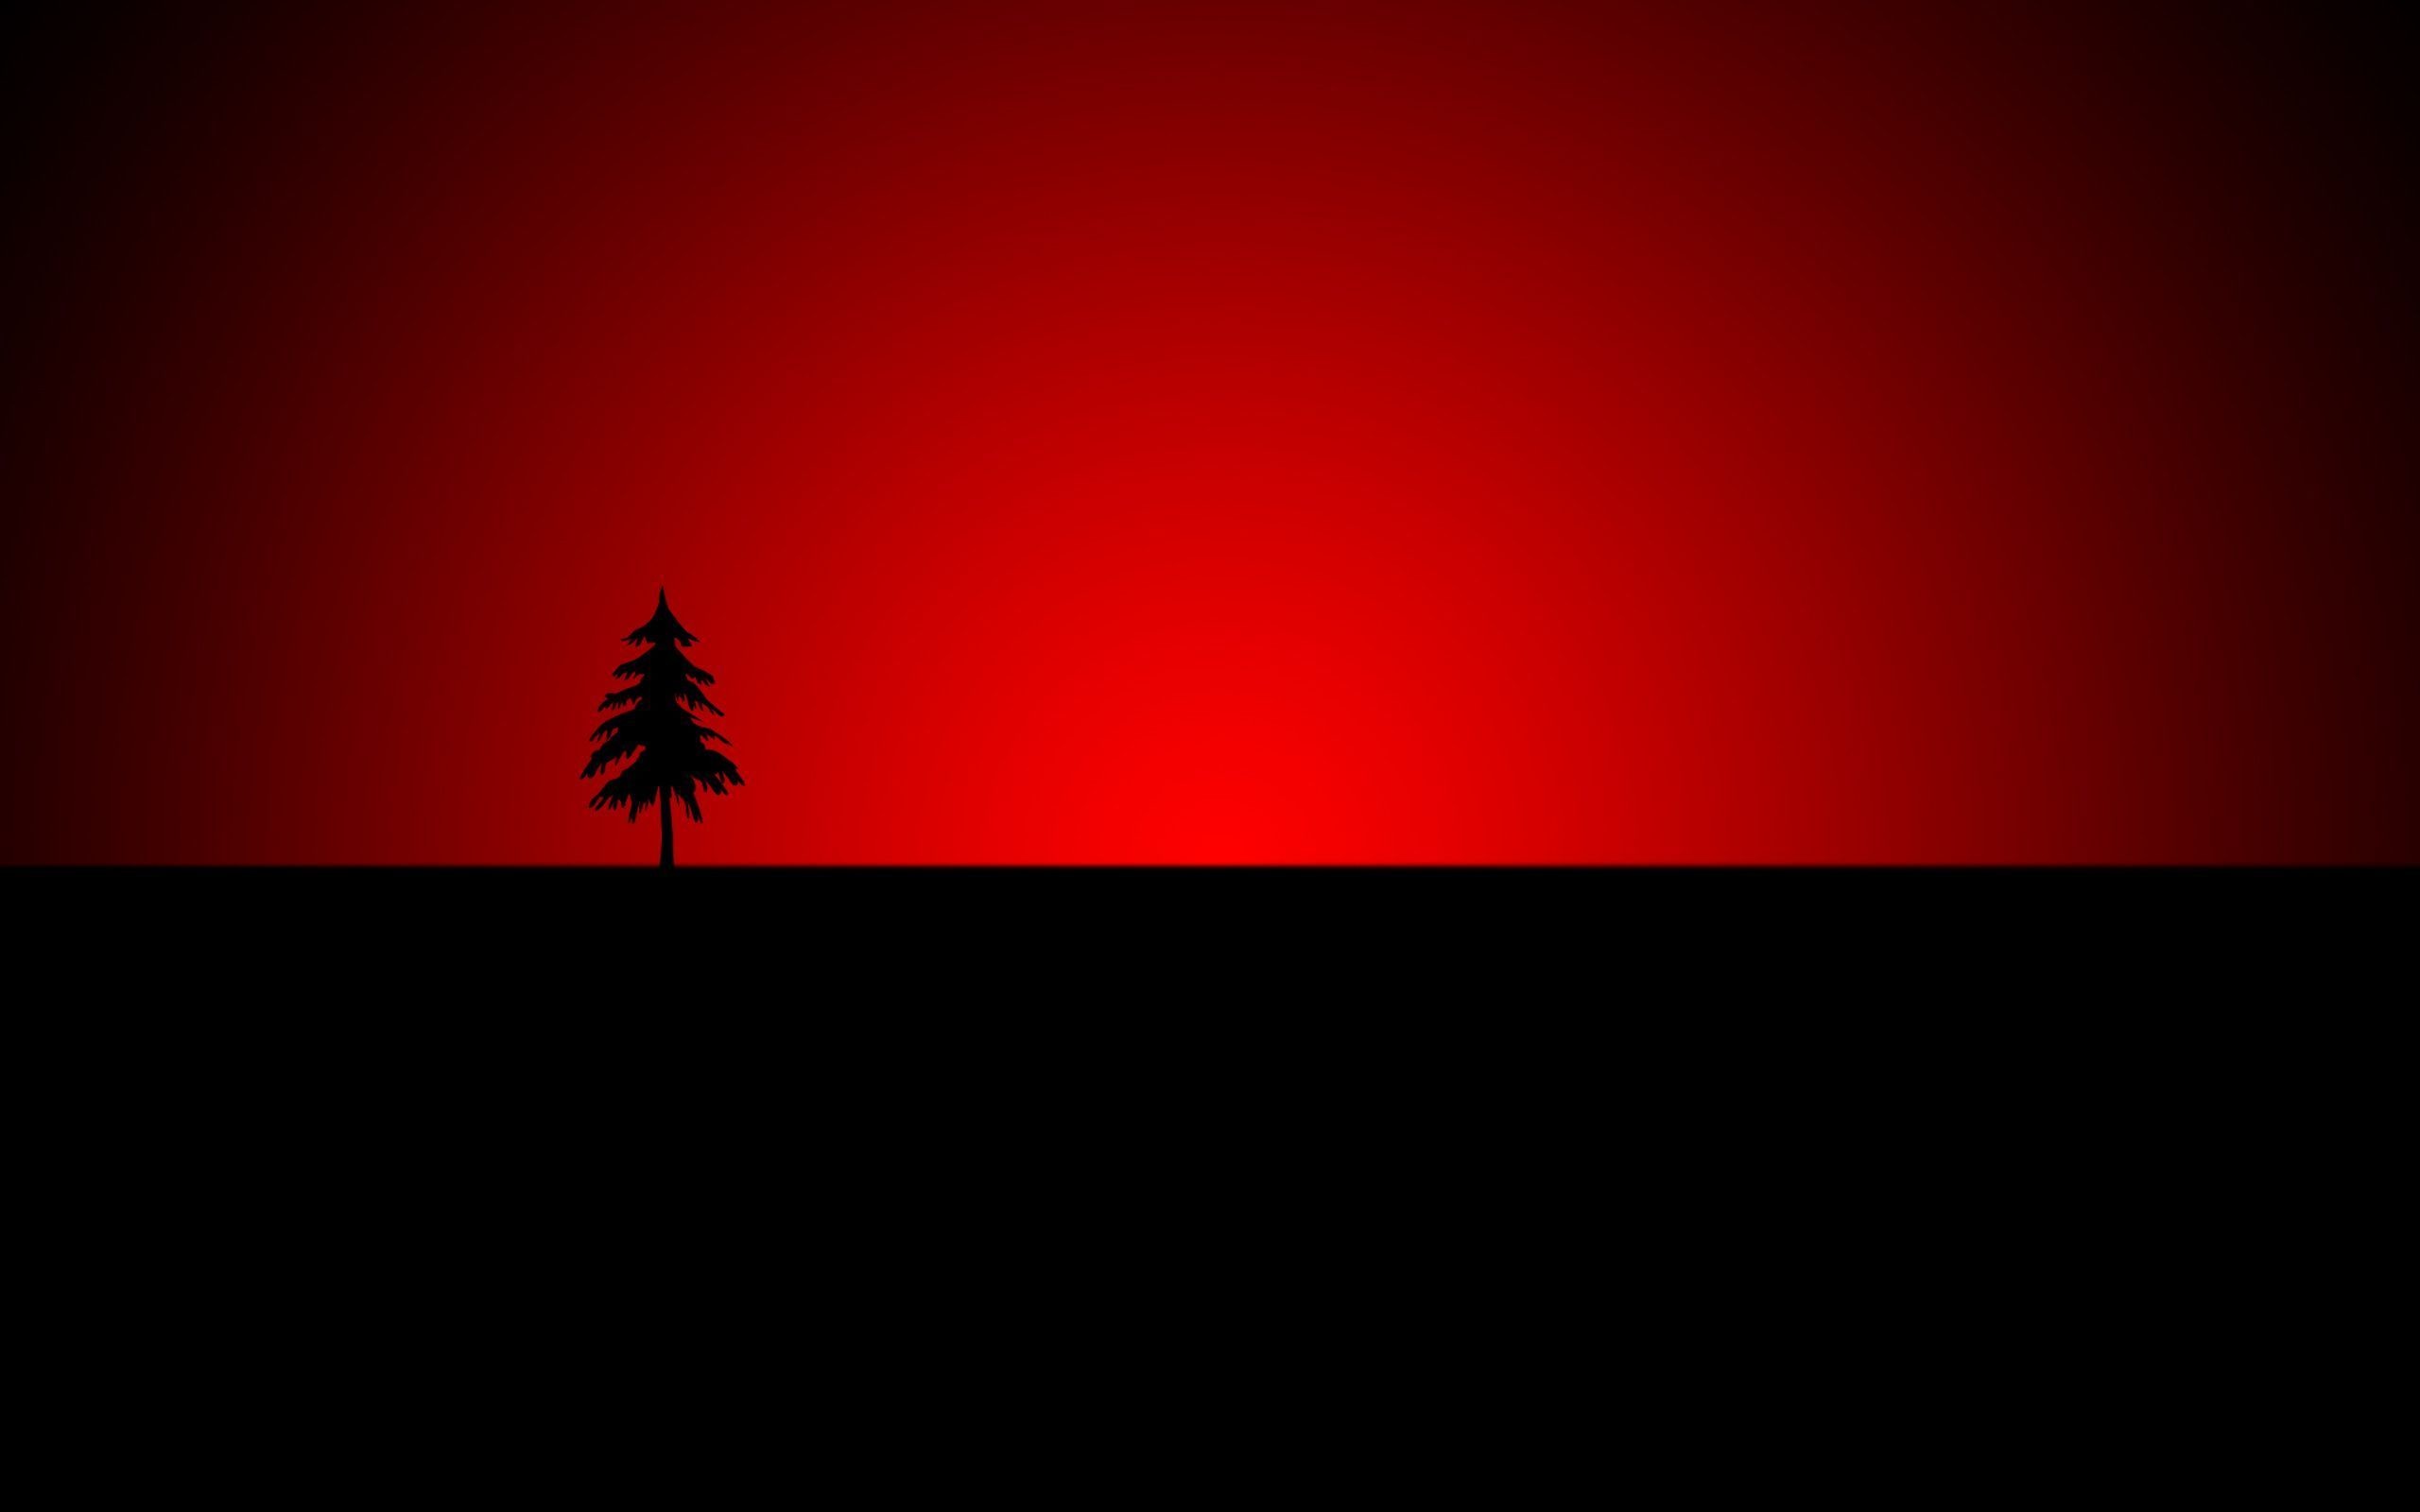 Red And Black Wallpapers